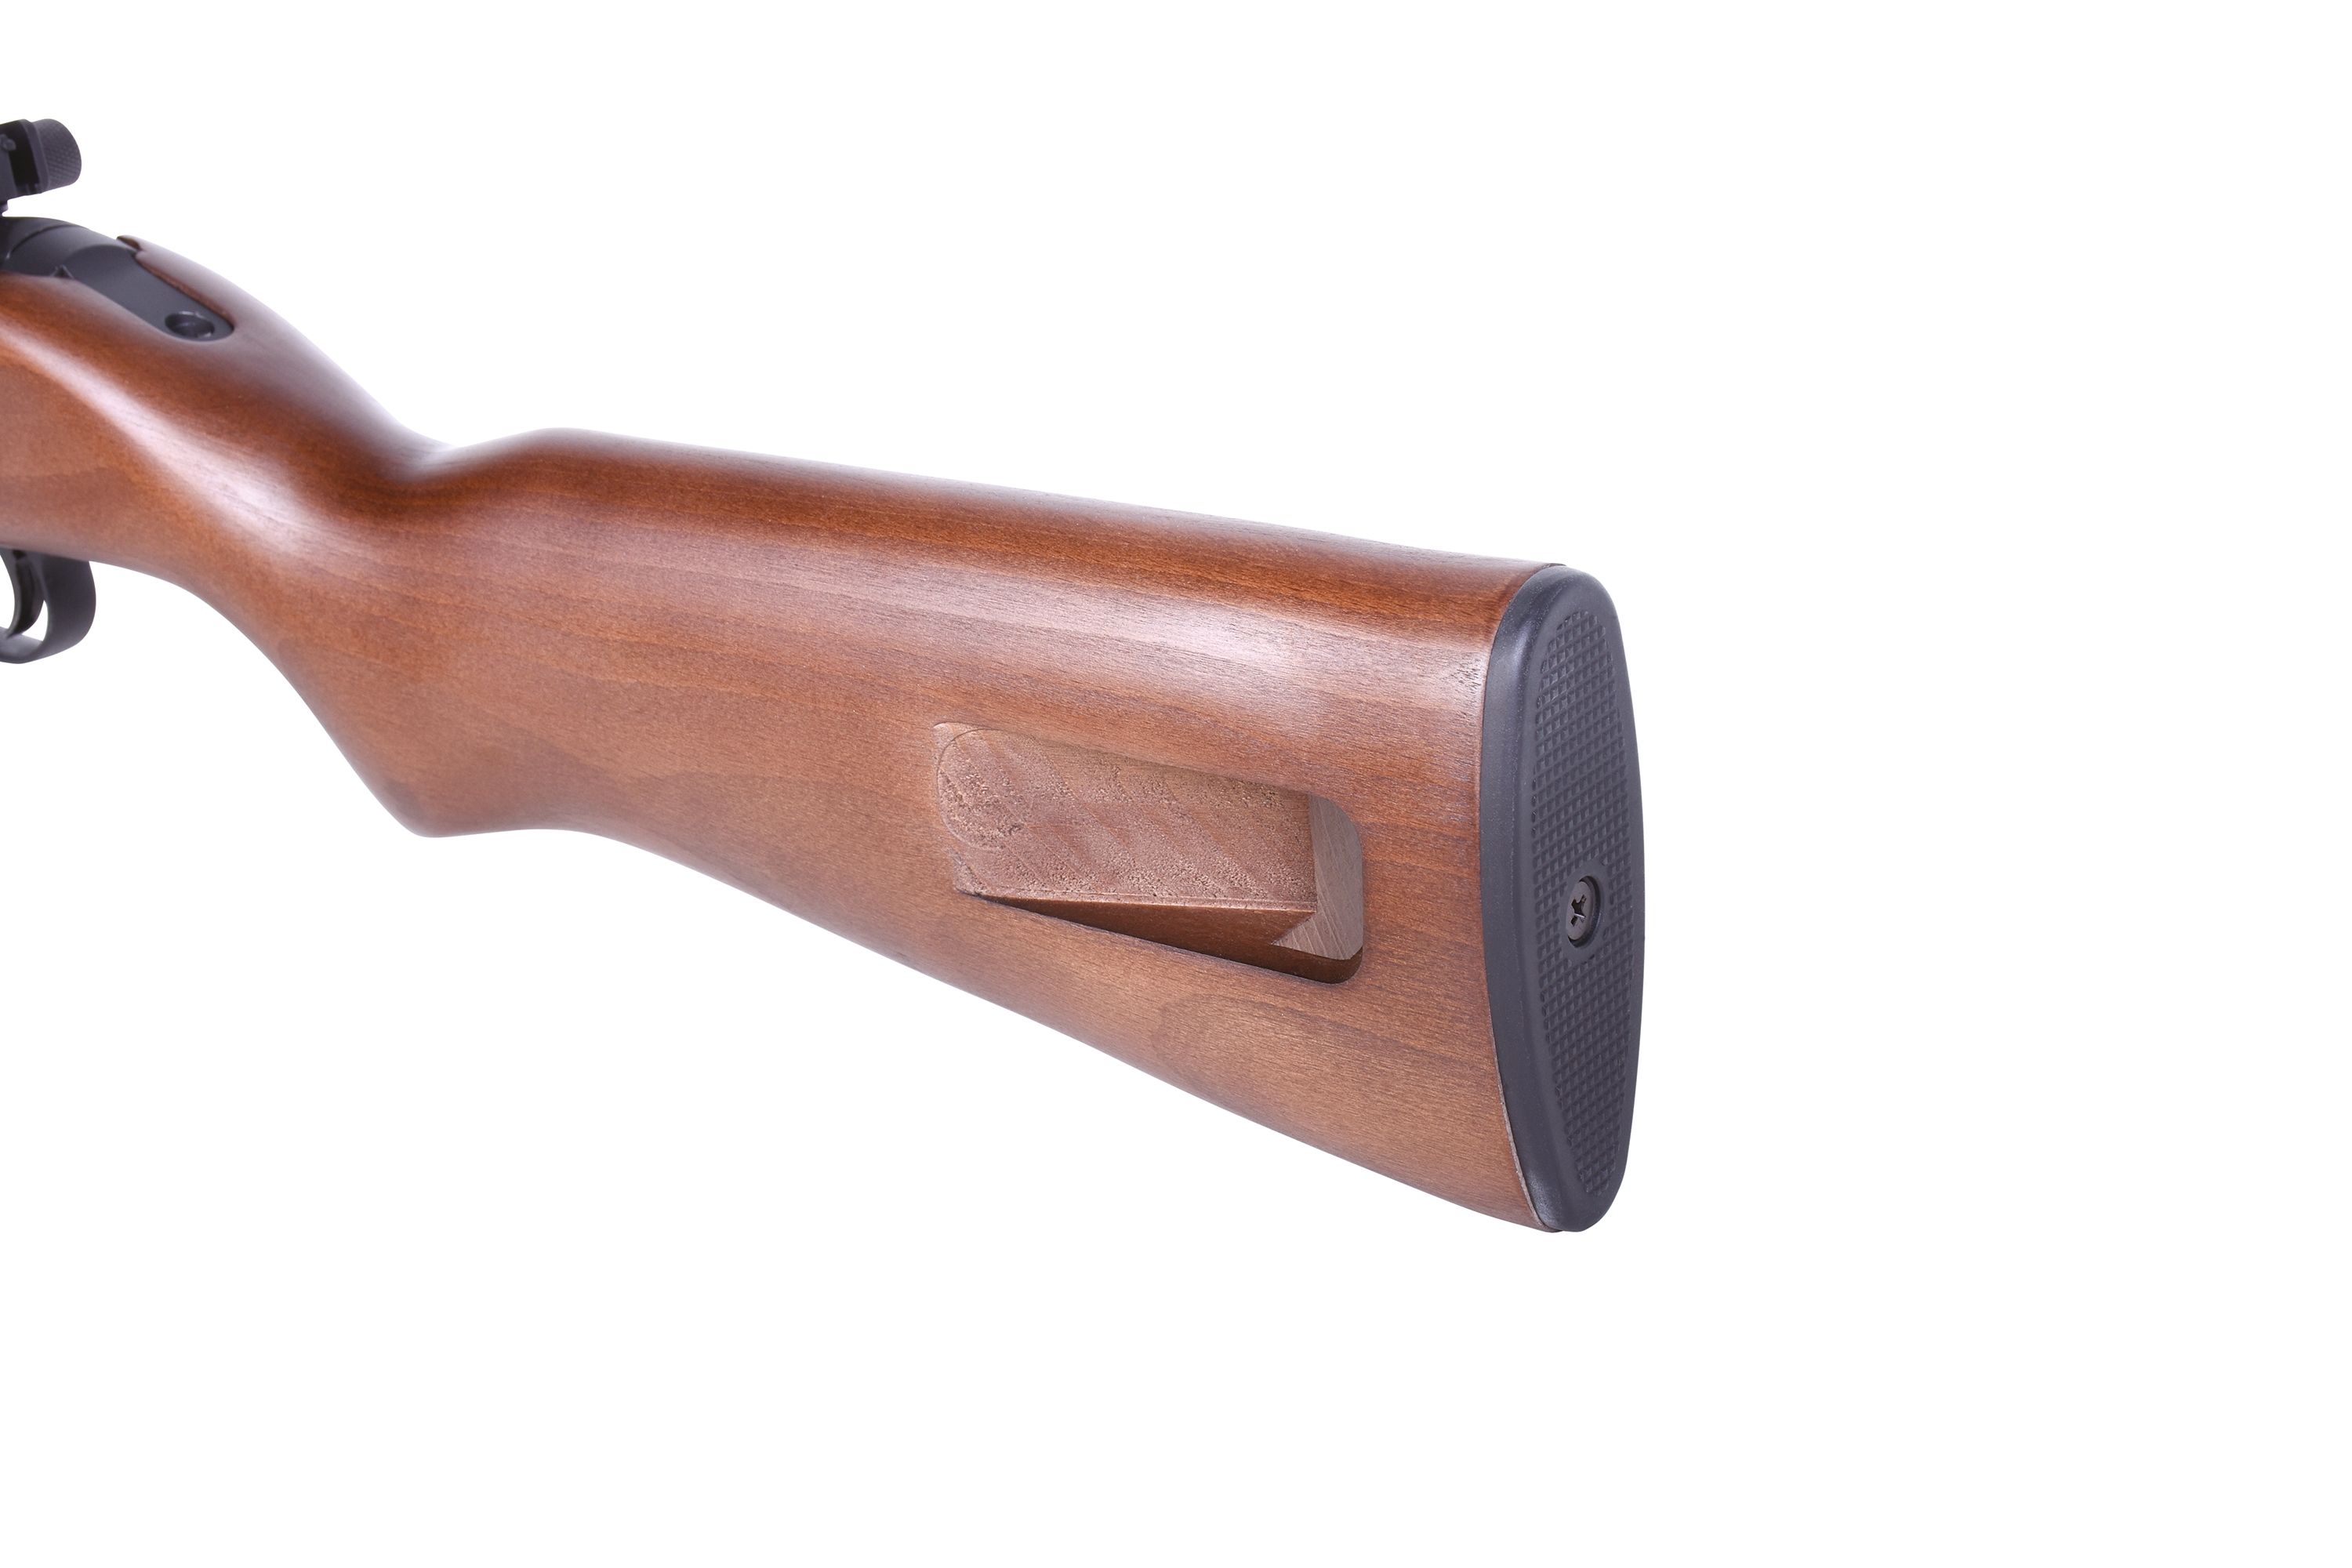 Springfield M1 Carbine Echtholz 6mm - Airsoft Co2